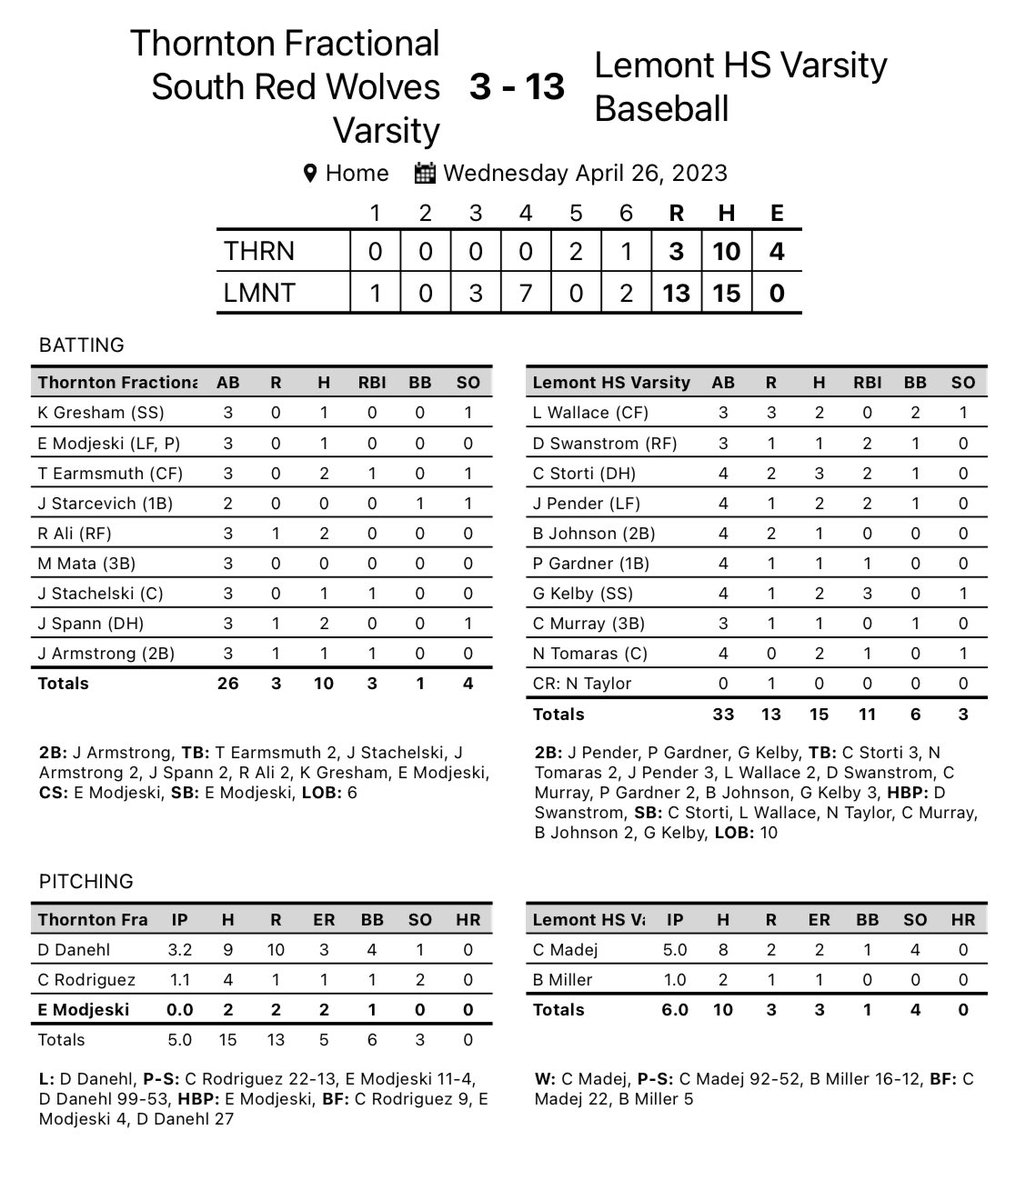 Solid #TEAM win today! Have a day!#WN #WeAreLemont Highlights: @CannonMadej49 5IP 8H 2ER 1BB 4K @CarterStorti 3-4 2RBI @L_Wallace16 2-3 3R 2BB @JoePender17 2-4 2b 2RBI @gavin_kelby 2-4 2b 3RBI @NoahTomaras 2-4 RBI